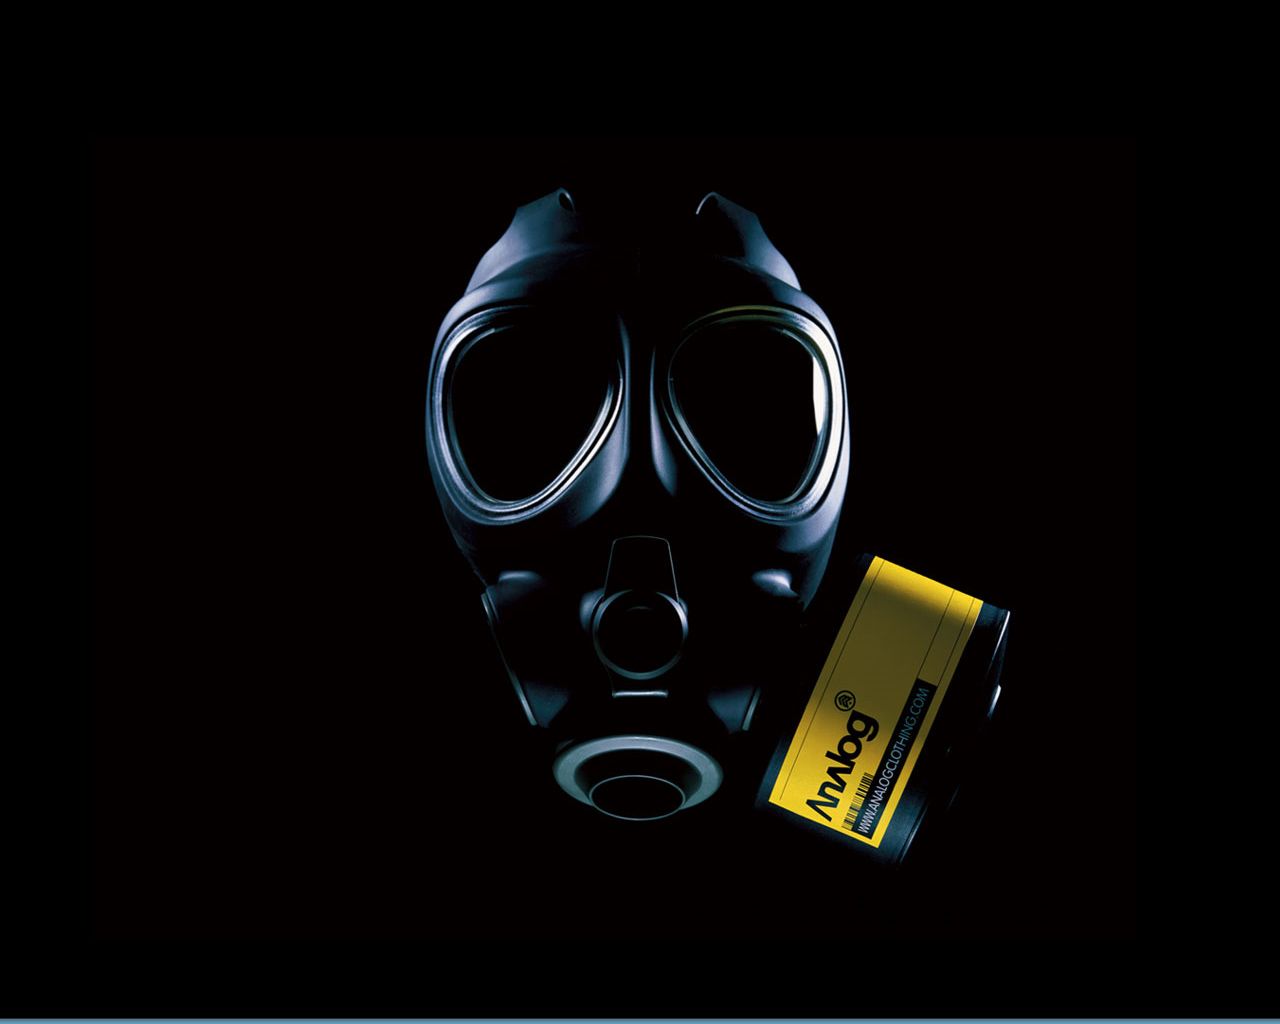 Gas Mask Wallpaper and Background Imagex1024